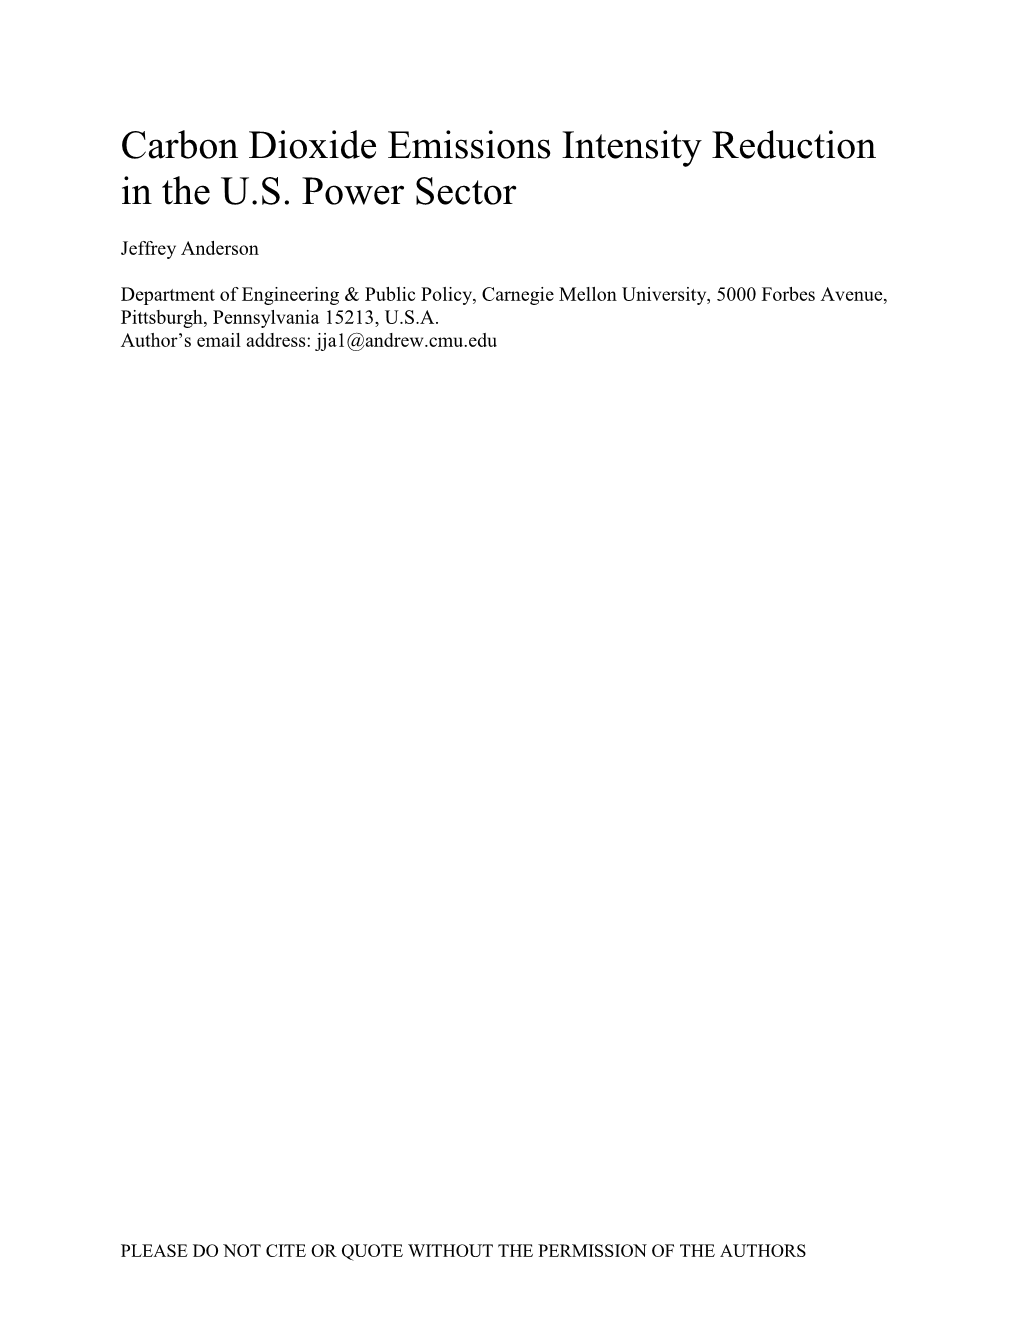 CO2 Emissions Intensity Reduction in the US Power Sector